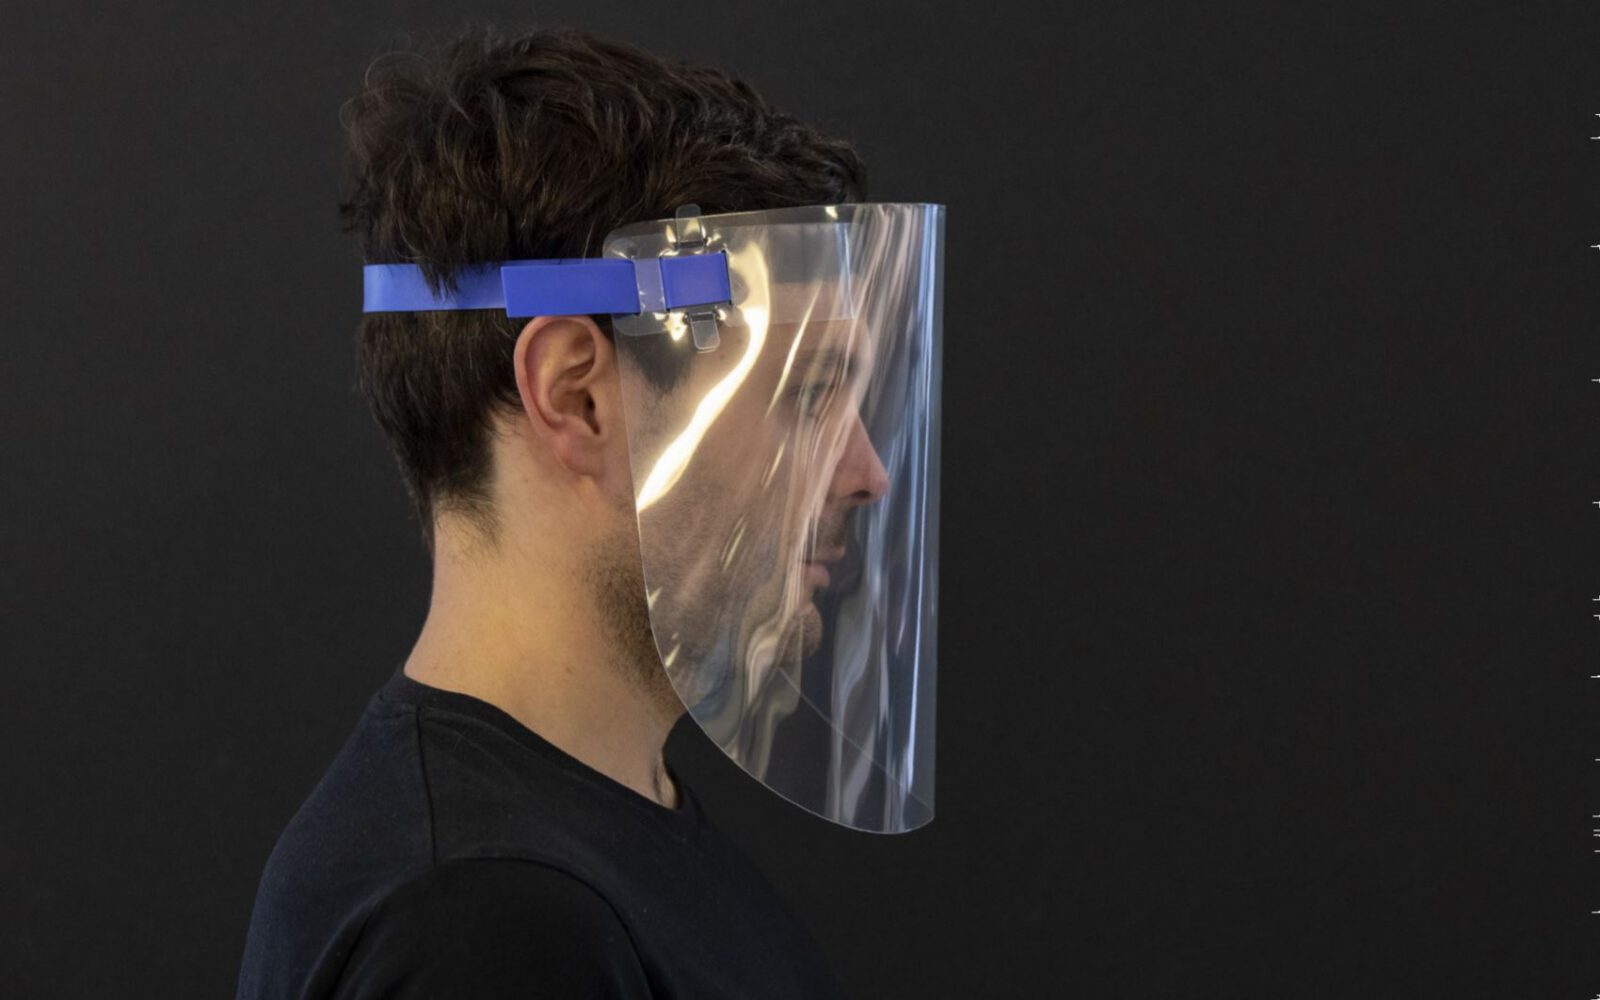 Archisearch Foster + Partners shares the prototype design for a reusable face visor